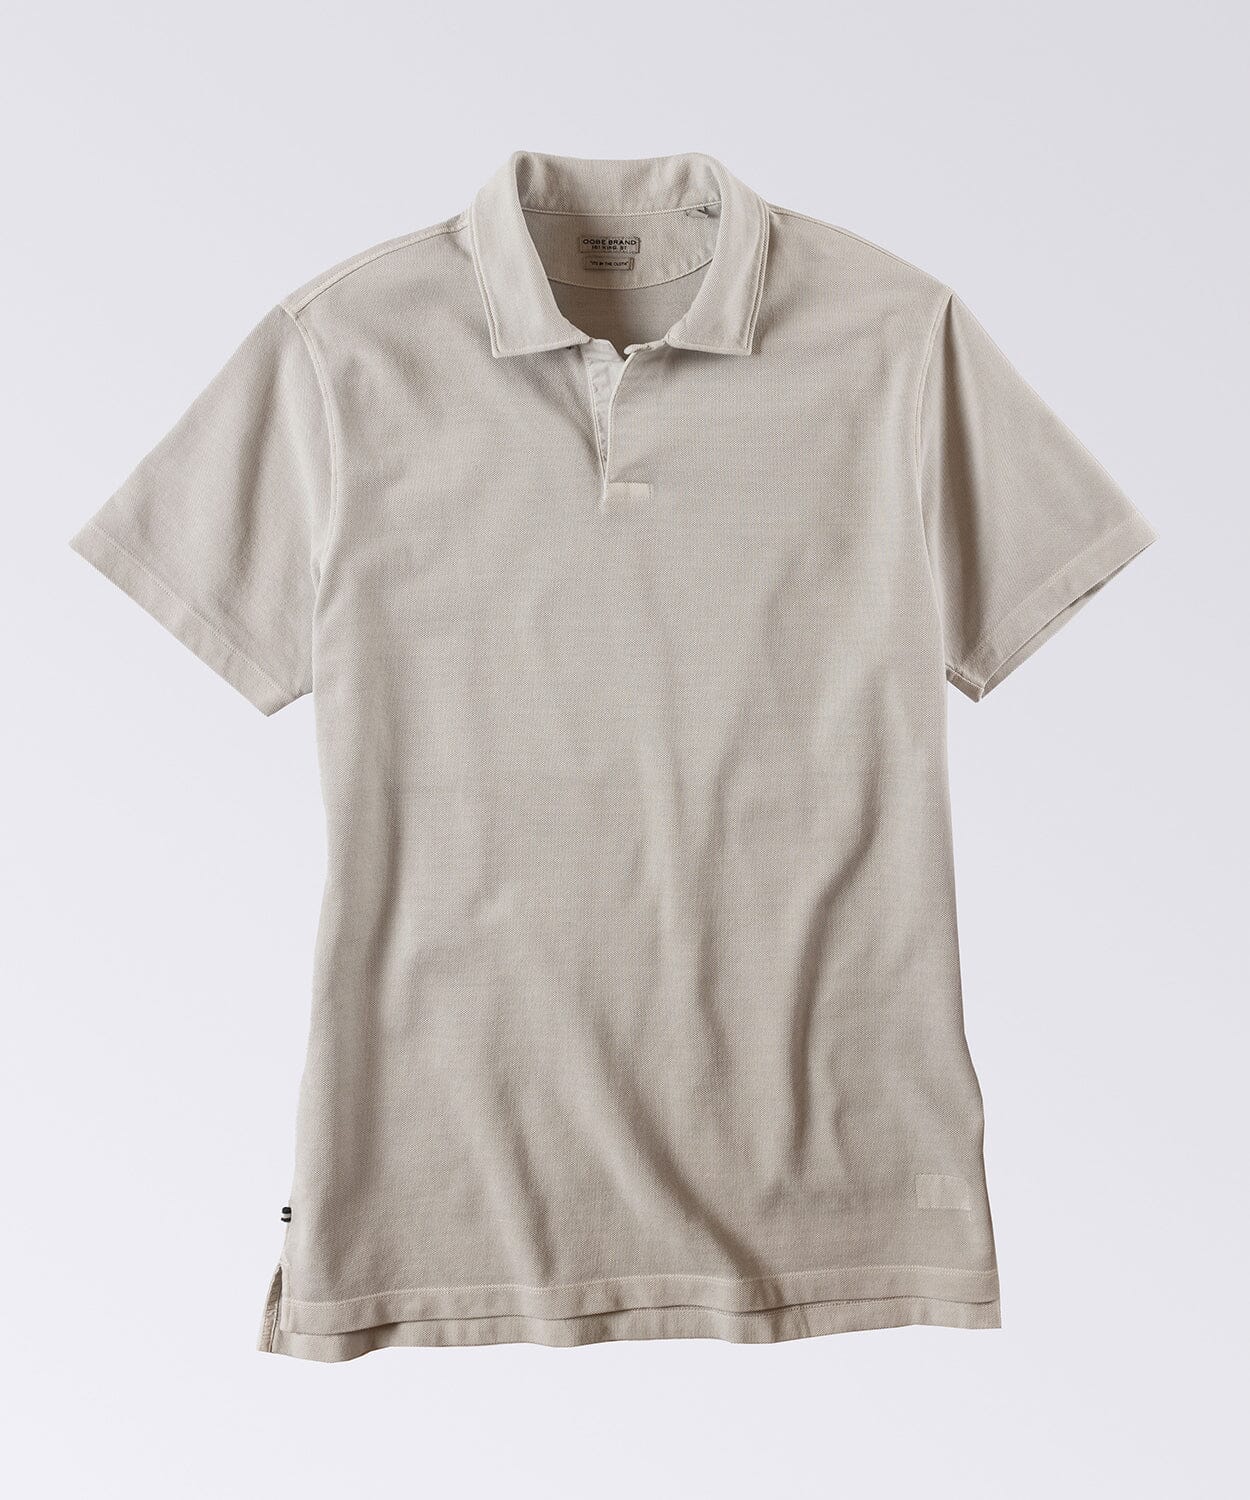 mens polo shirt by oobe brand